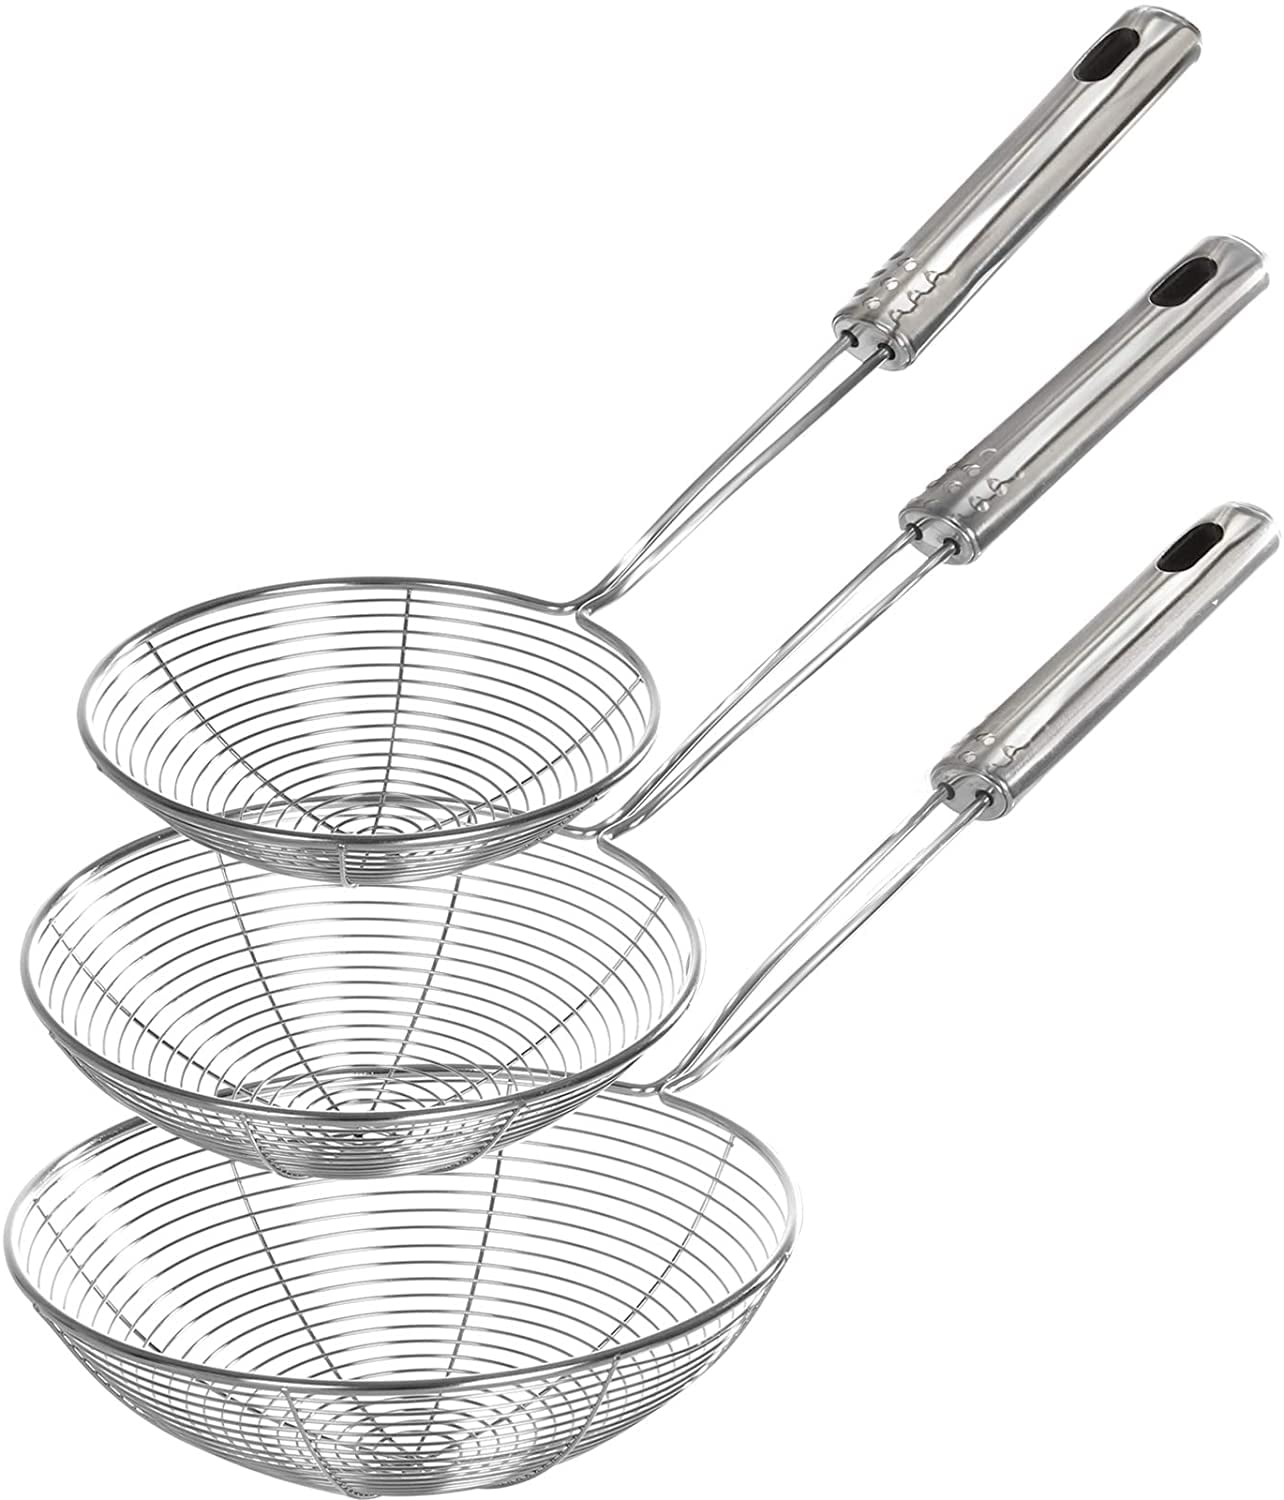 shuoyiersty Solid Spider Strainer Skimmer Ladle with Handle Stainless Steel Kitchen Tool